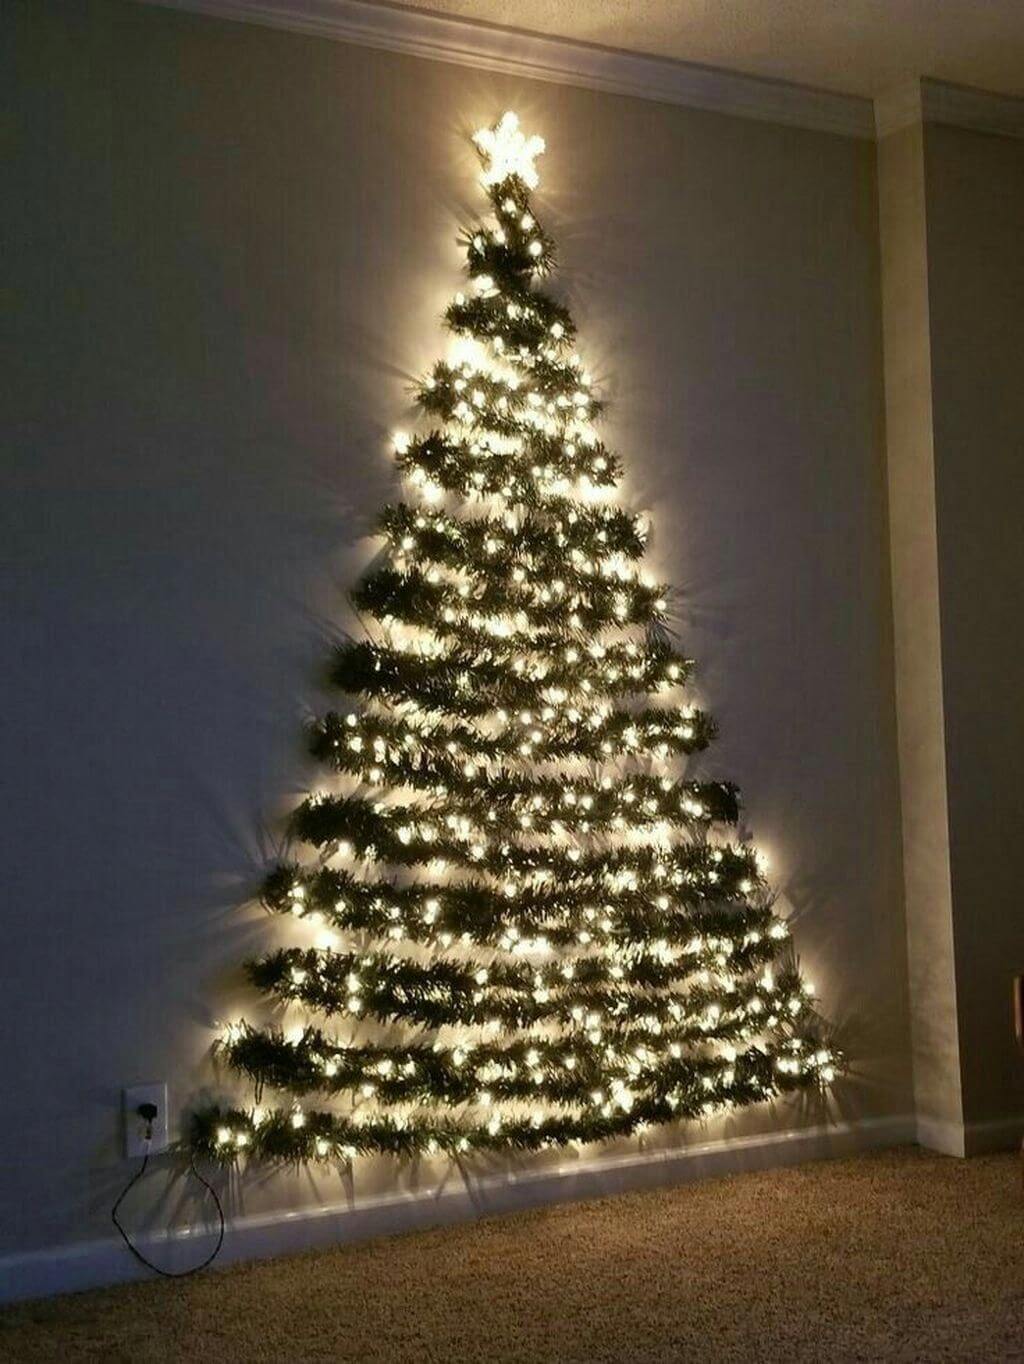 Christmas decorations without a tree